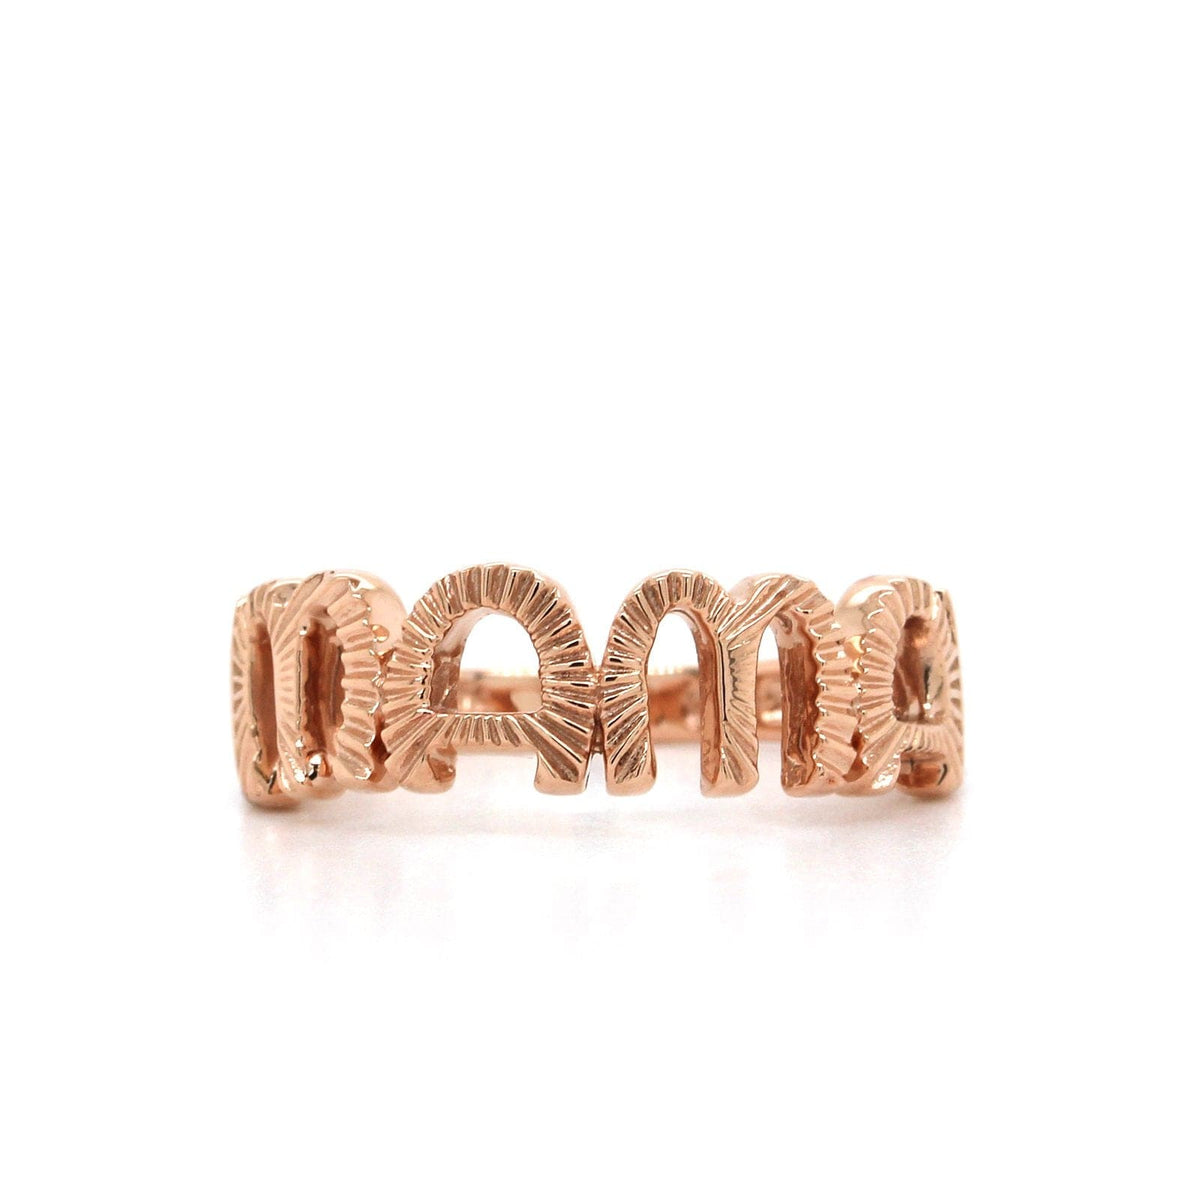 The Veda 14K Rose Gold "MAMA" Fluted Ring, 14K Rose Gold, Long's Jewelers